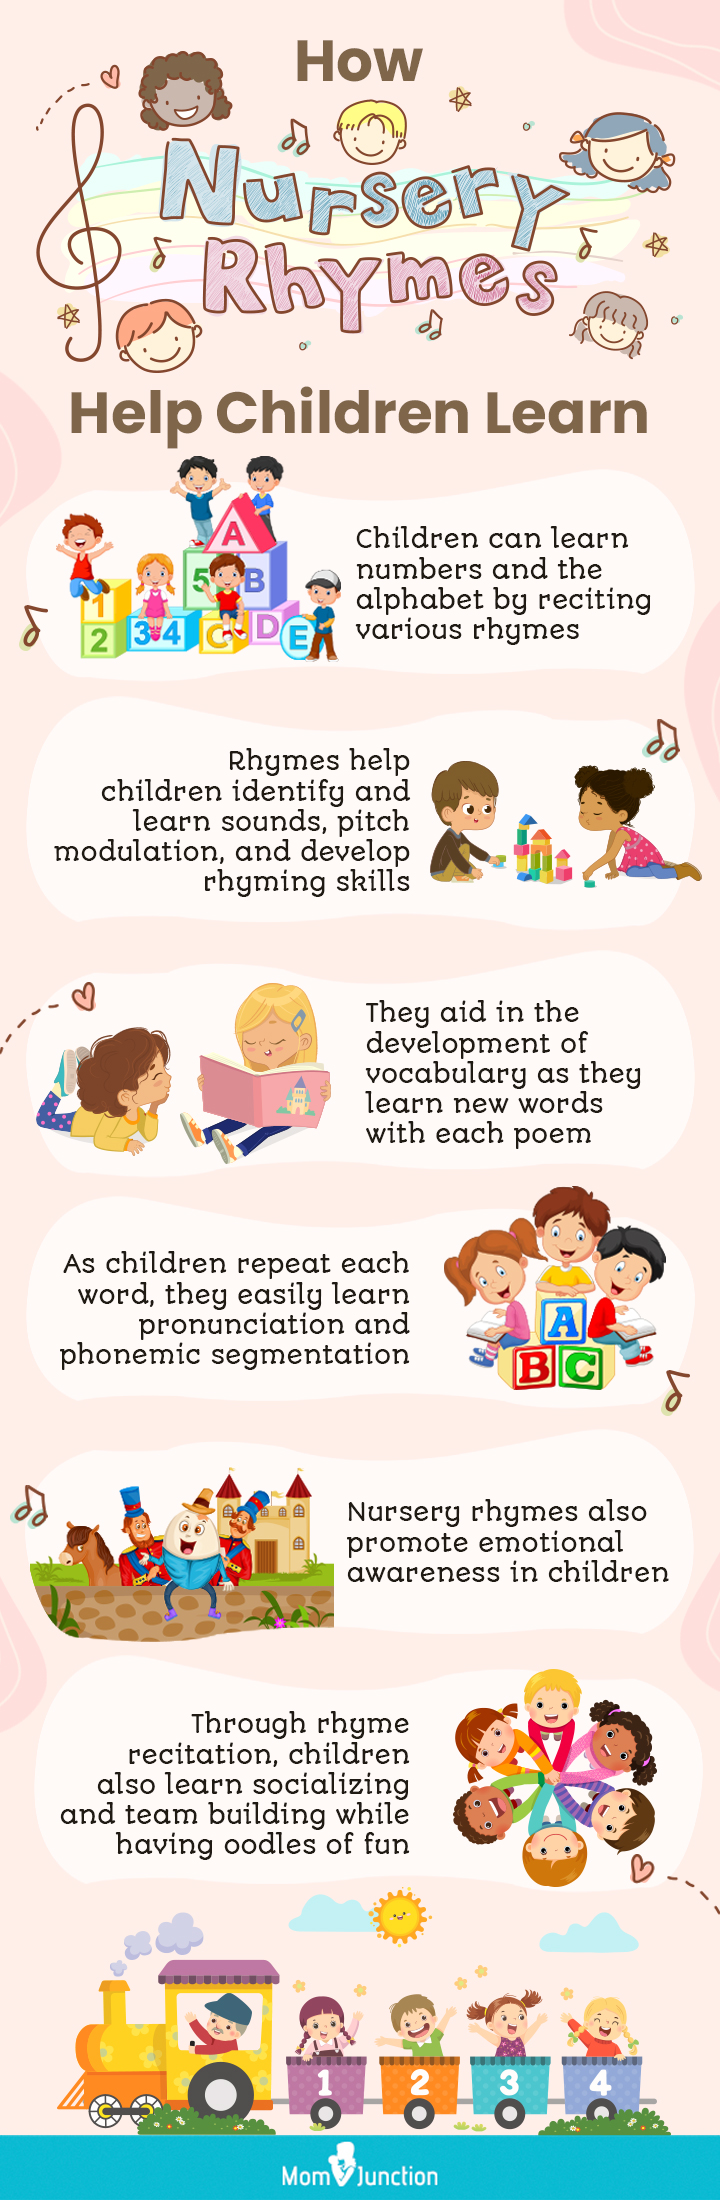 how nursery rhymes help children learn [infographic]